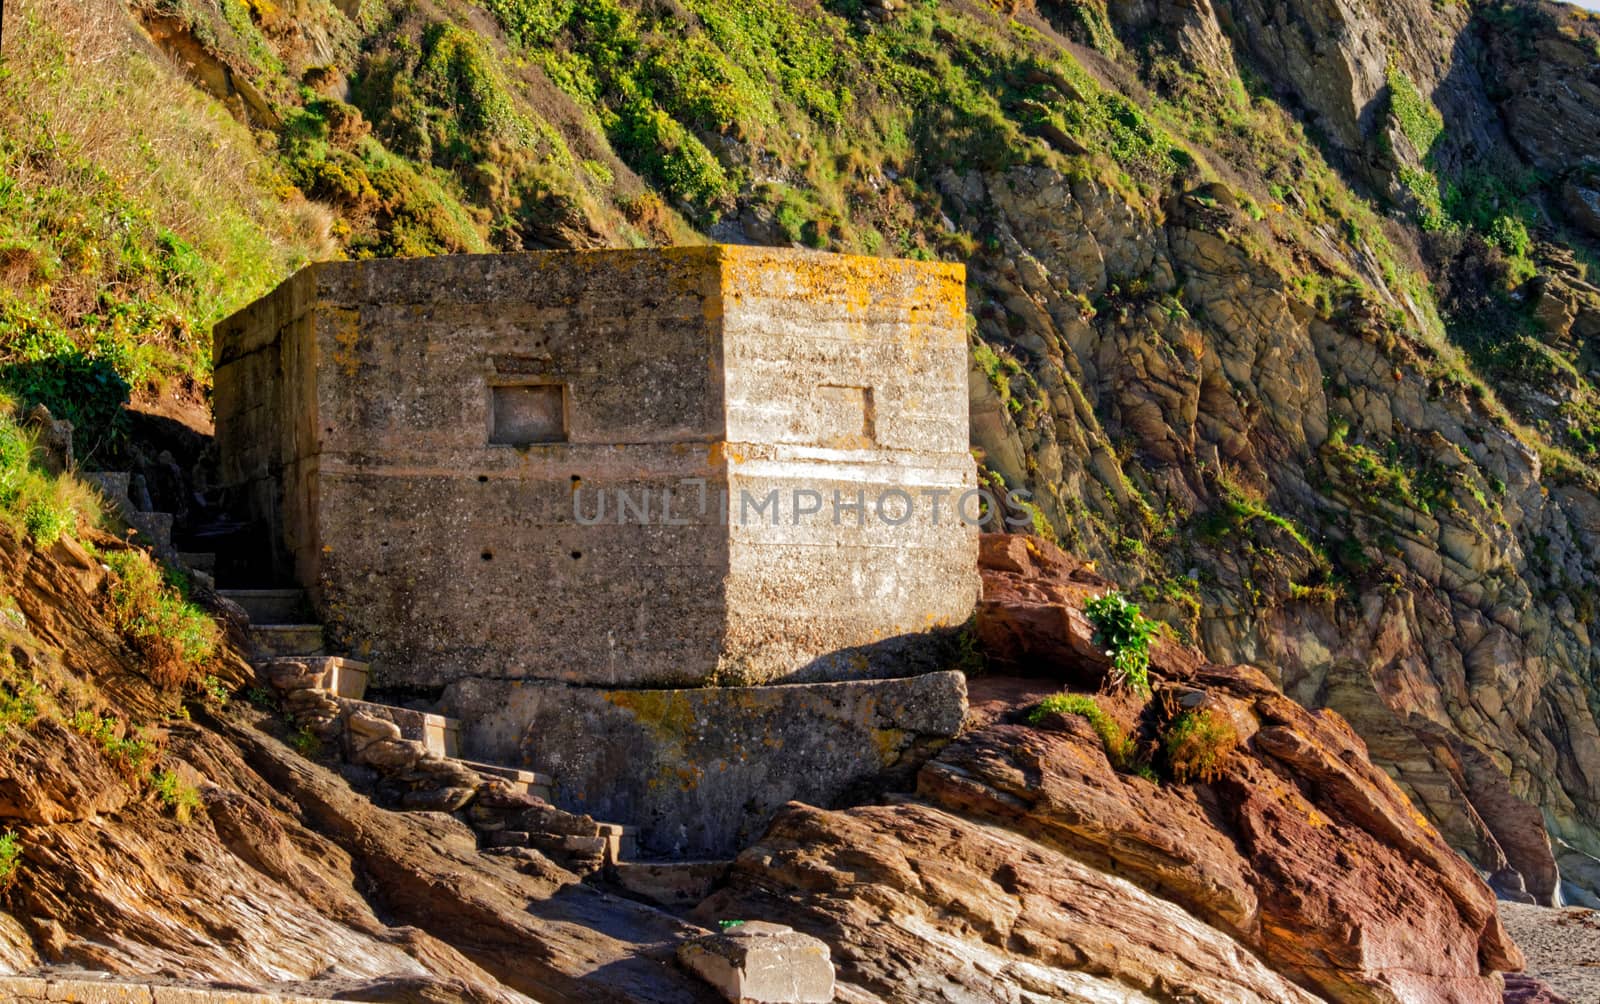 World War 2 Pill Boxespart of the  defence against nazi invasion. On a beach in Cornwall UK.